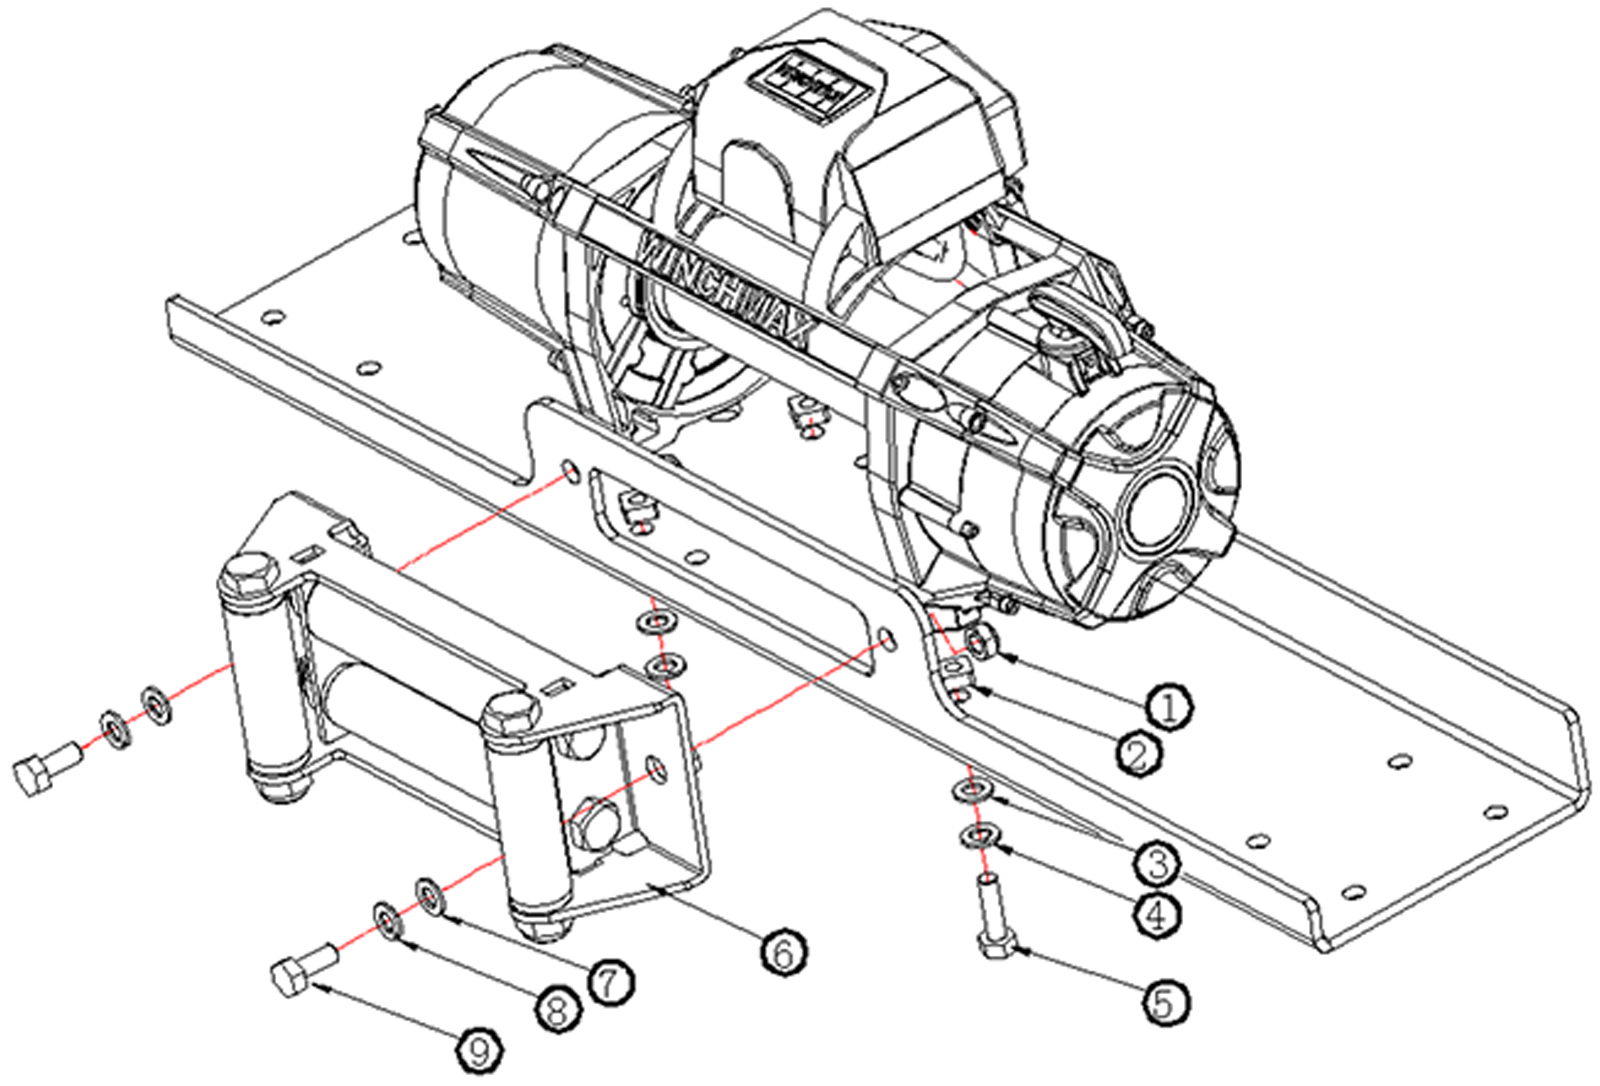 Winchmax winch, mounting plate and fairlead diagram